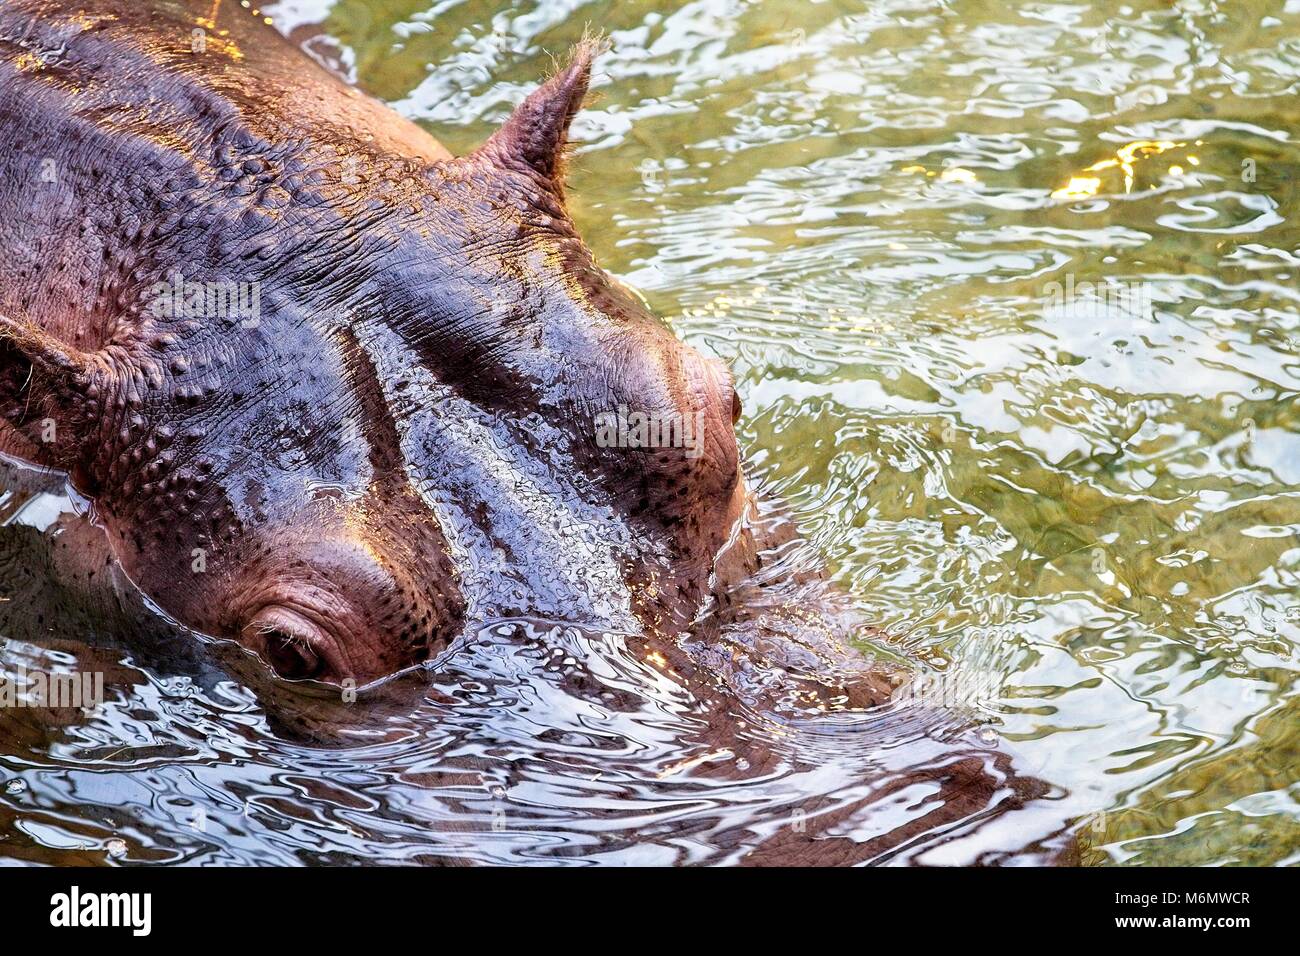 Hippopotamus in the water. Close-up to head. Photo taken from above. Stock Photo